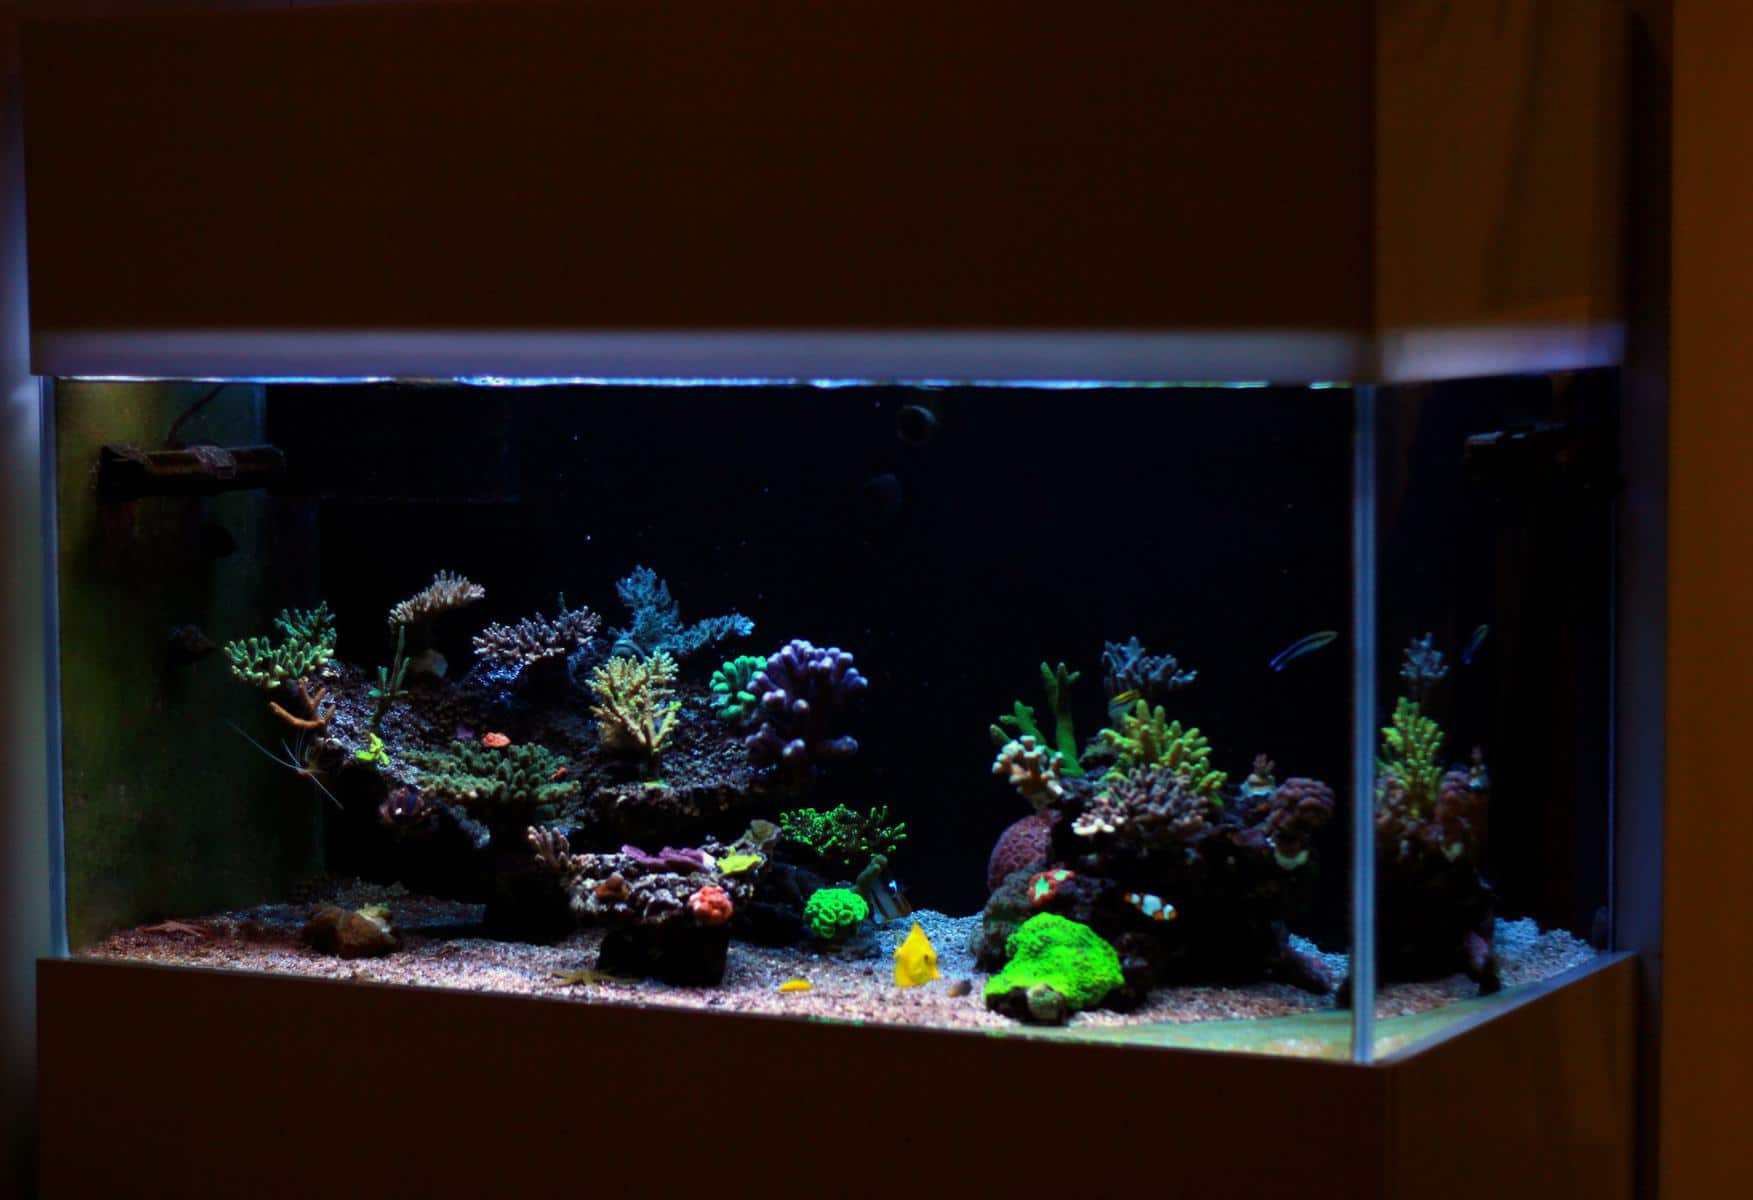 How heavy is a 75 gallon fish tank?